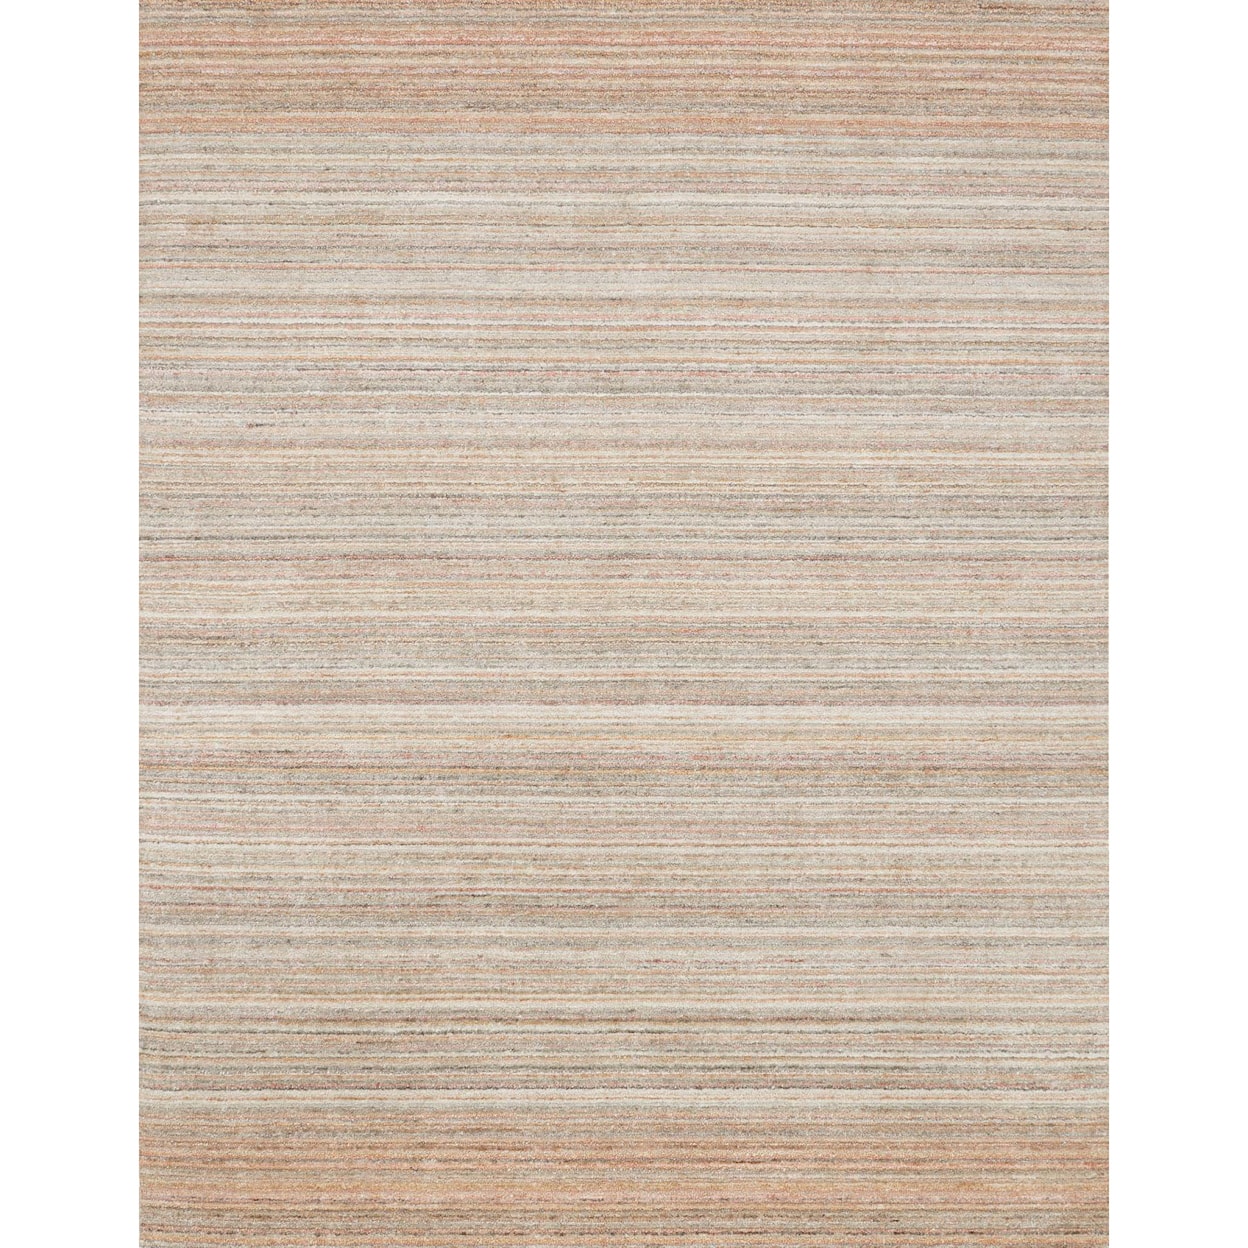 Loloi Rugs Haven 2'-0" x 3'-0" Area Rug